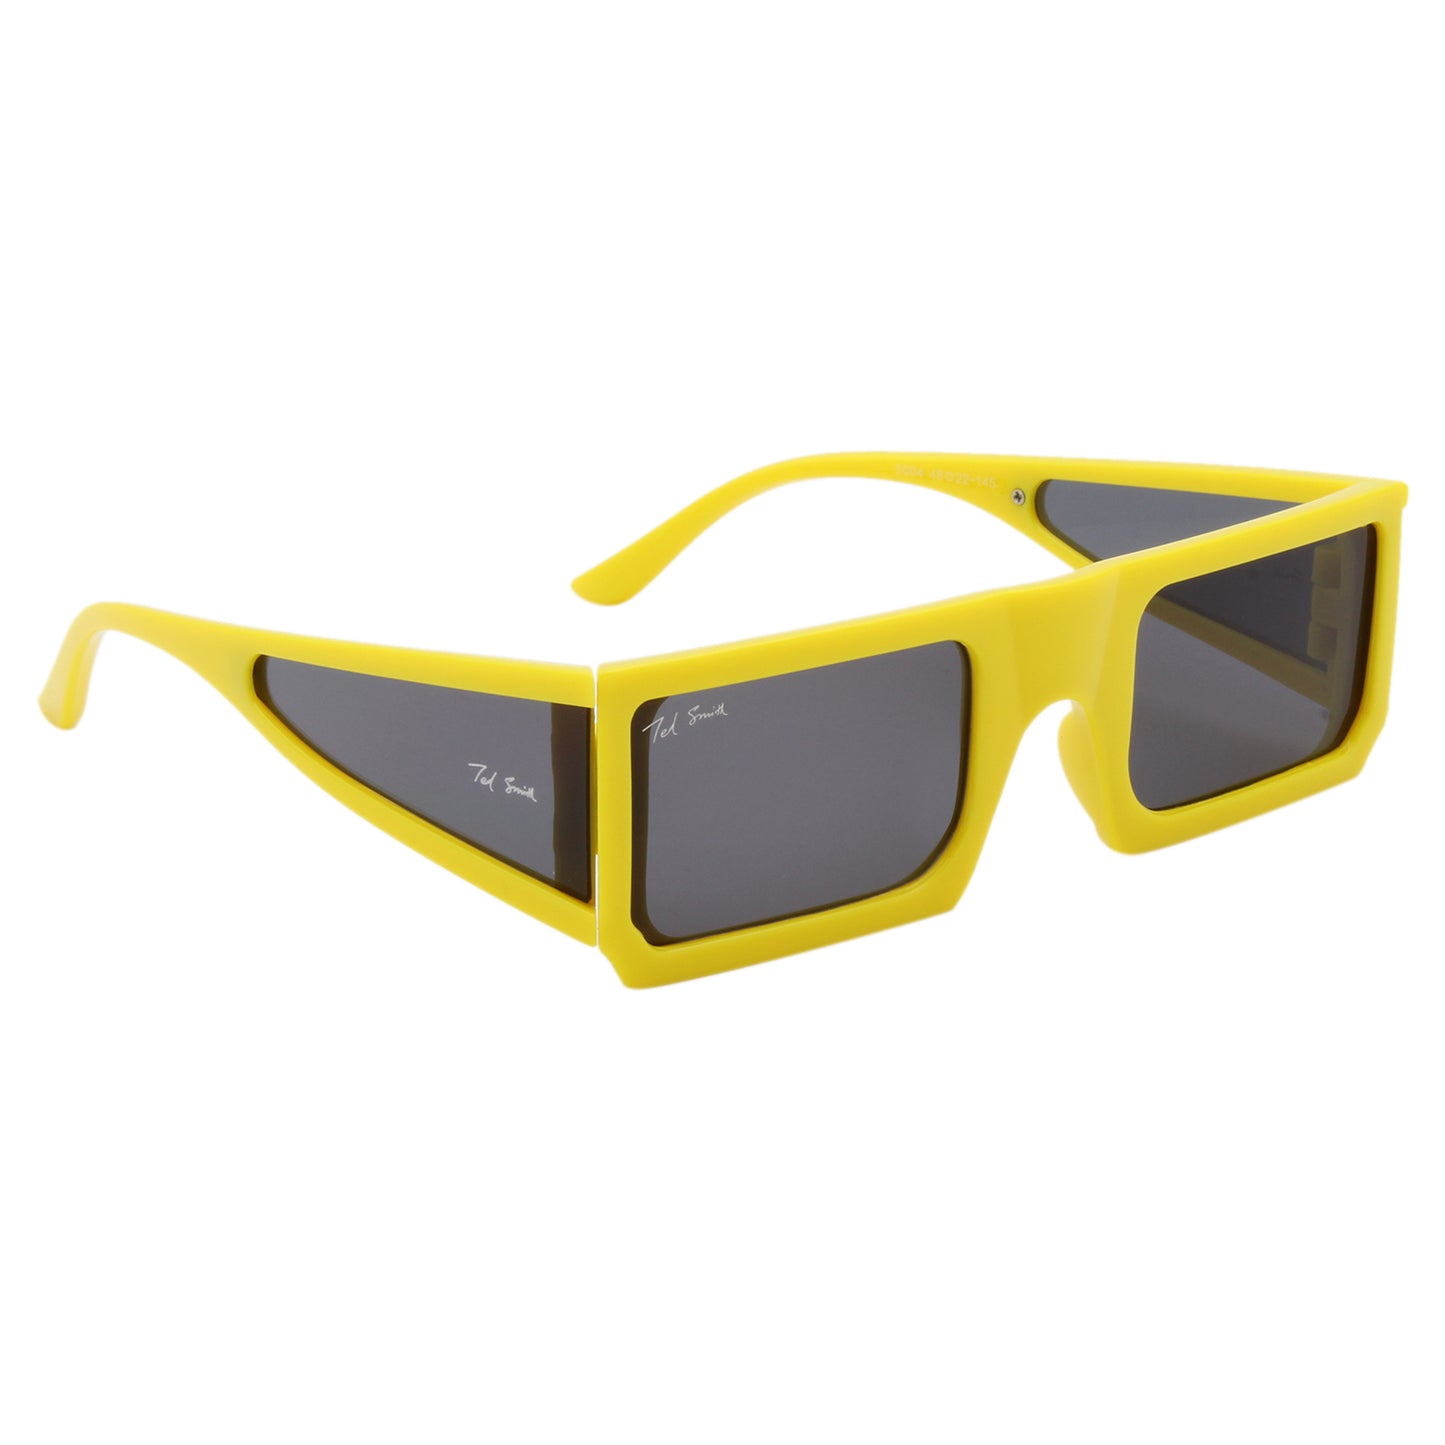 DOPE SUNGLASSES (IN 4 COLORS)